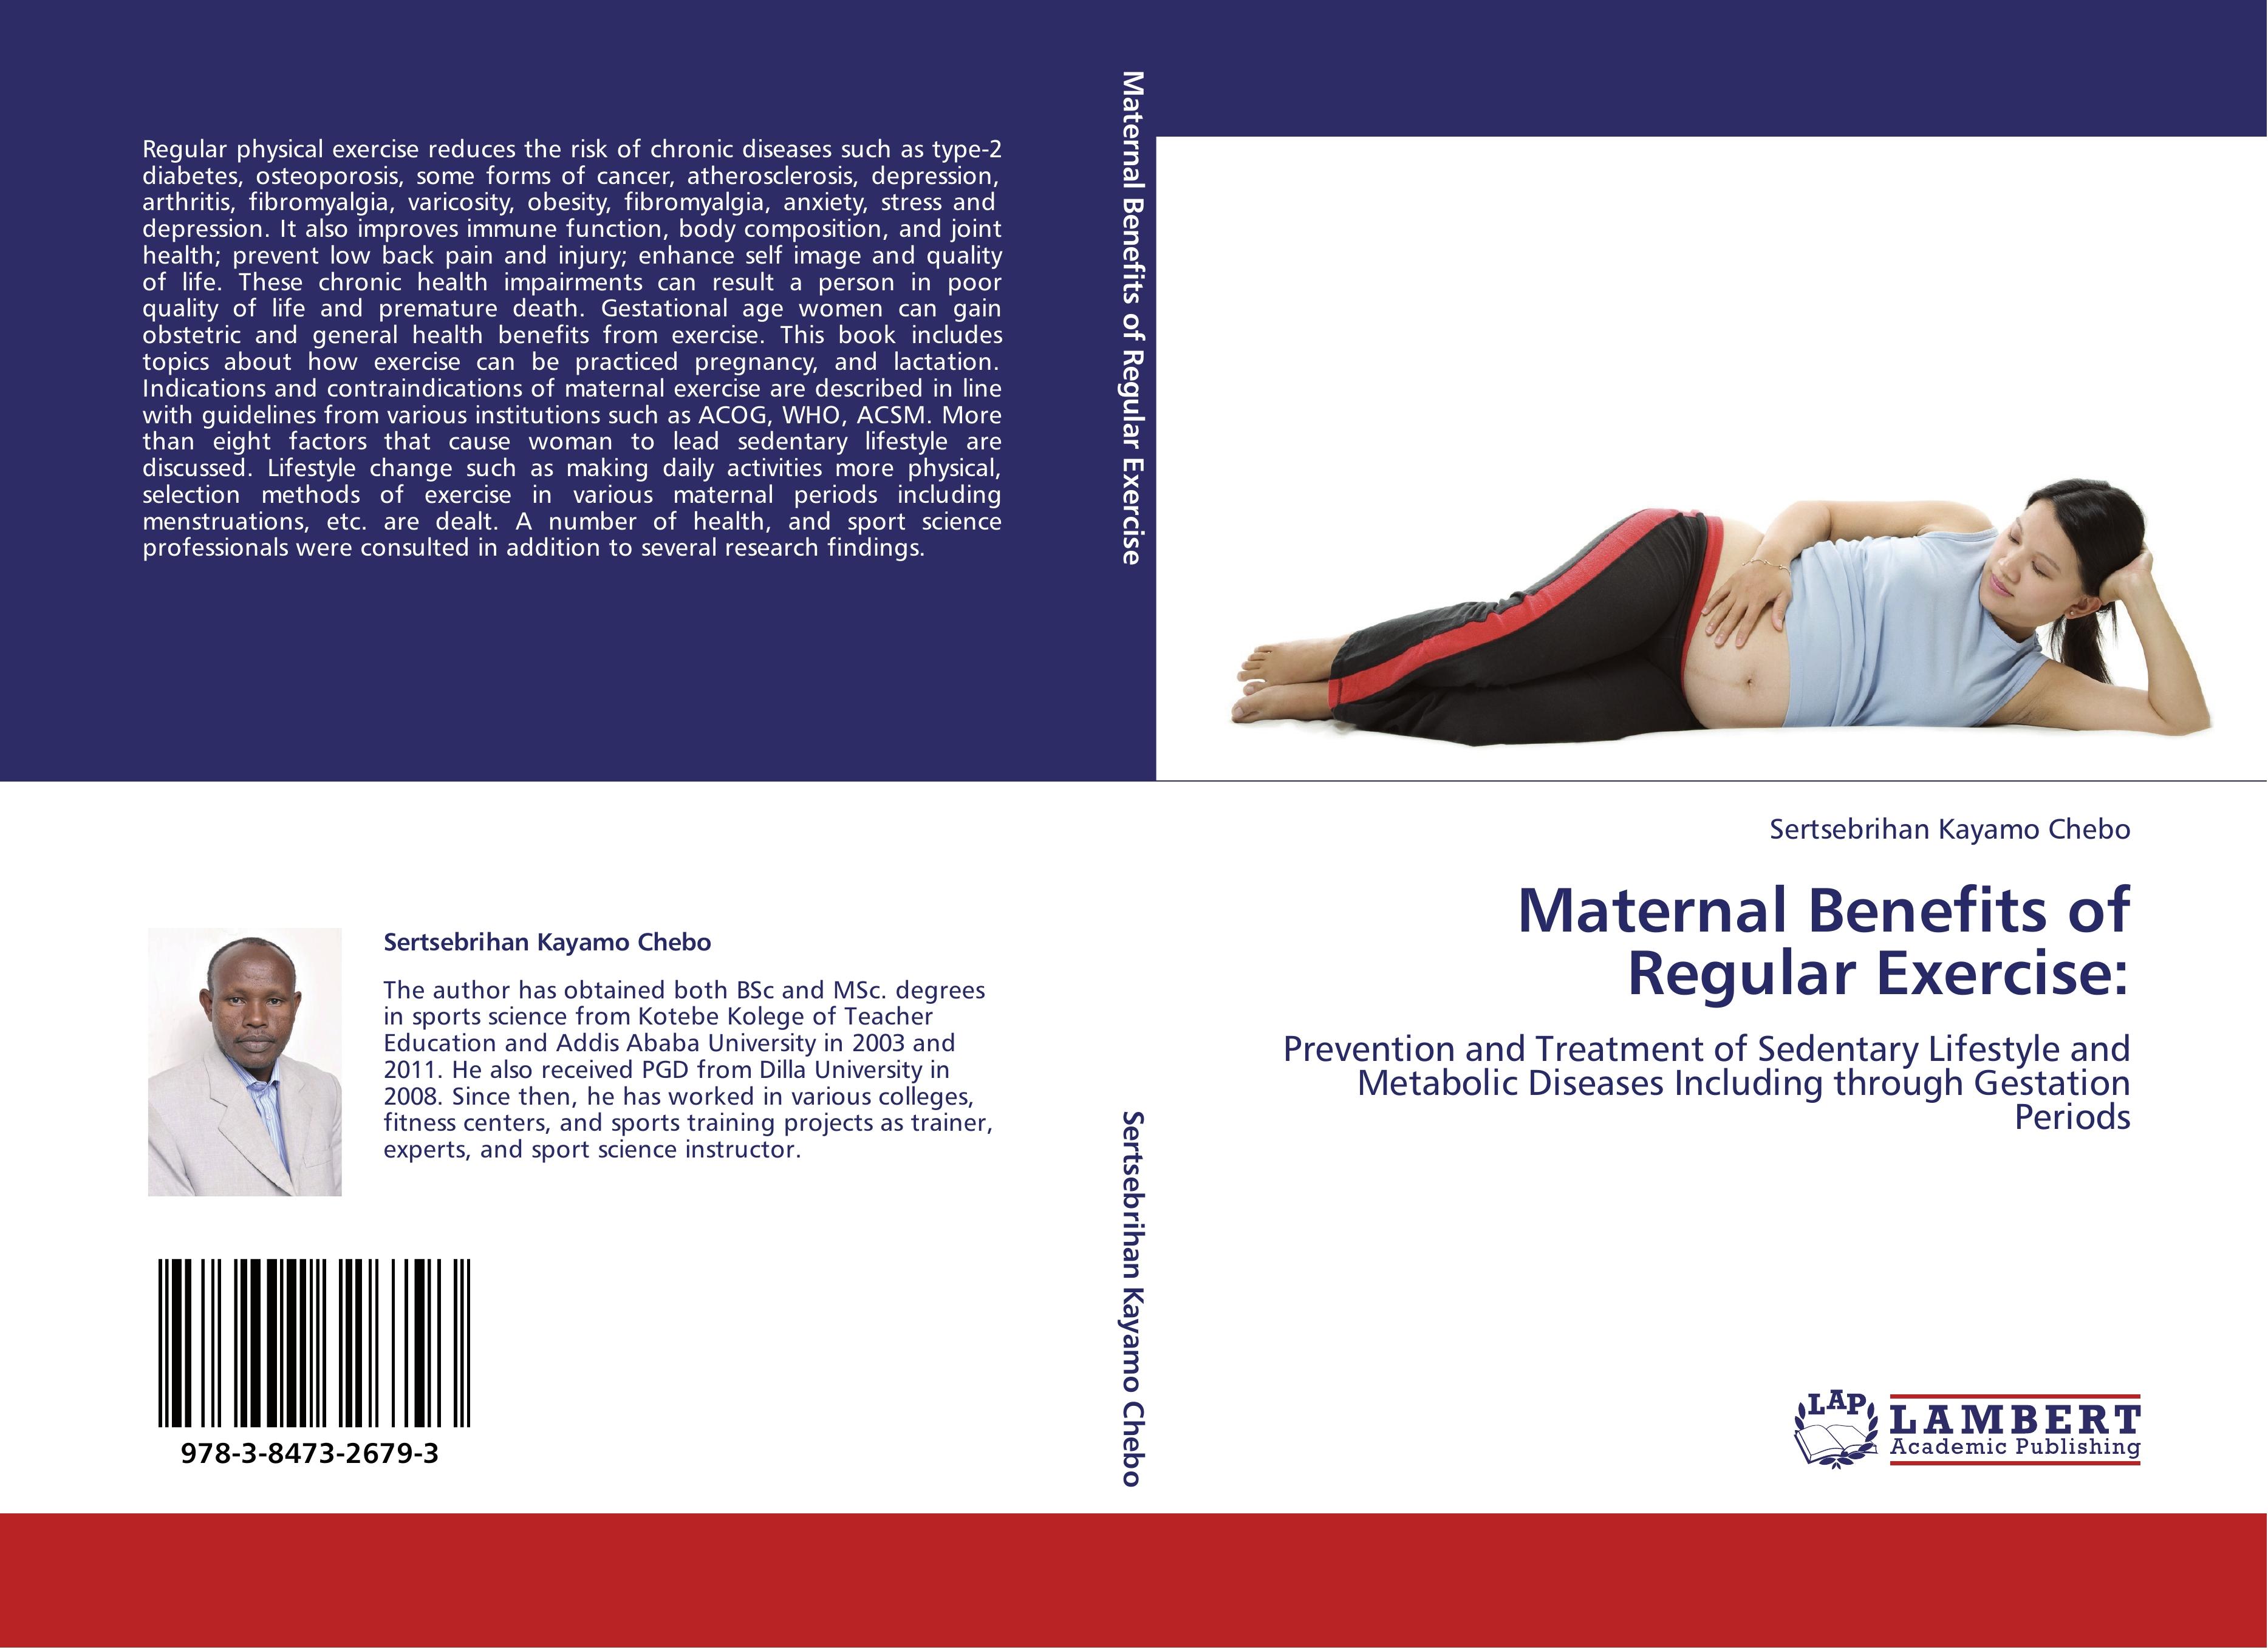 Maternal Benefits of Regular Exercise: | Prevention and Treatment of Sedentary Lifestyle and Metabolic Diseases Including through Gestation Periods | Sertsebrihan Kayamo Chebo | Taschenbuch | 124 S. - Kayamo Chebo, Sertsebrihan